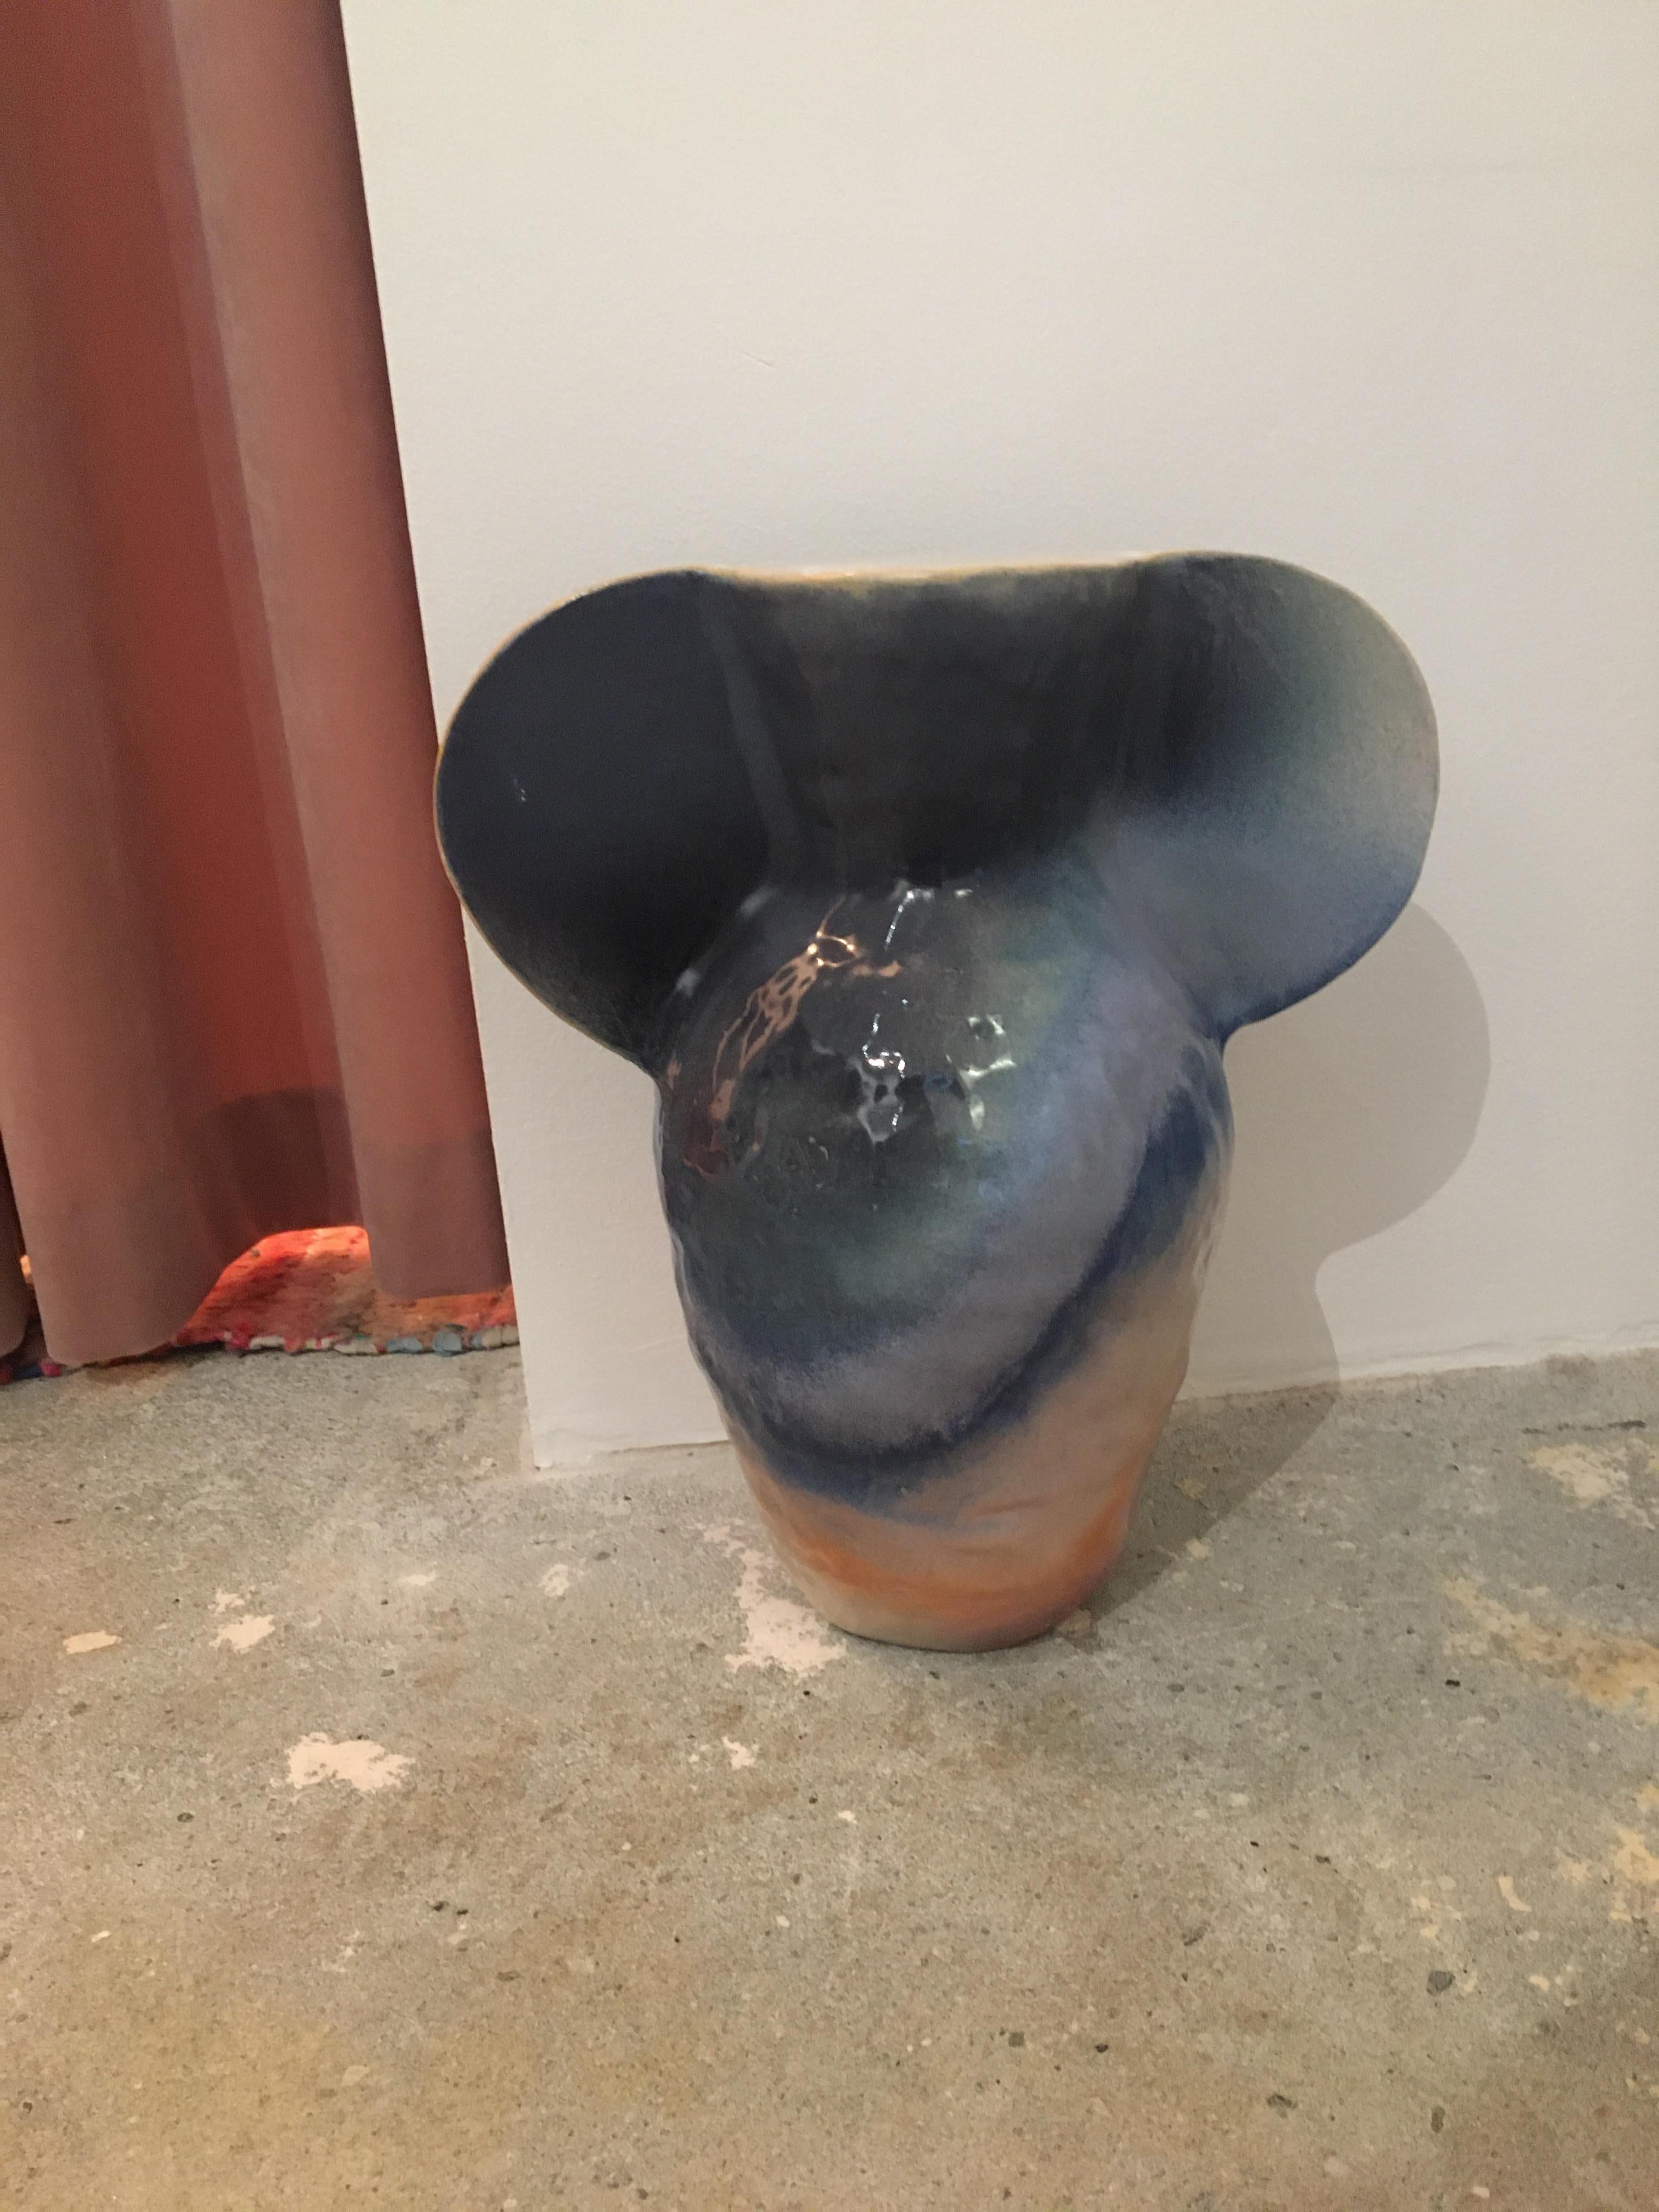 Sunset Sculpture Vase by Maria Lenskjold
Dimensions: H 30 cm
Materials: Stoneware

Maria Lenskjold’s practice is based on a consistent principle; to investigate and interact with the common pictorial artistic categories and challenge them in